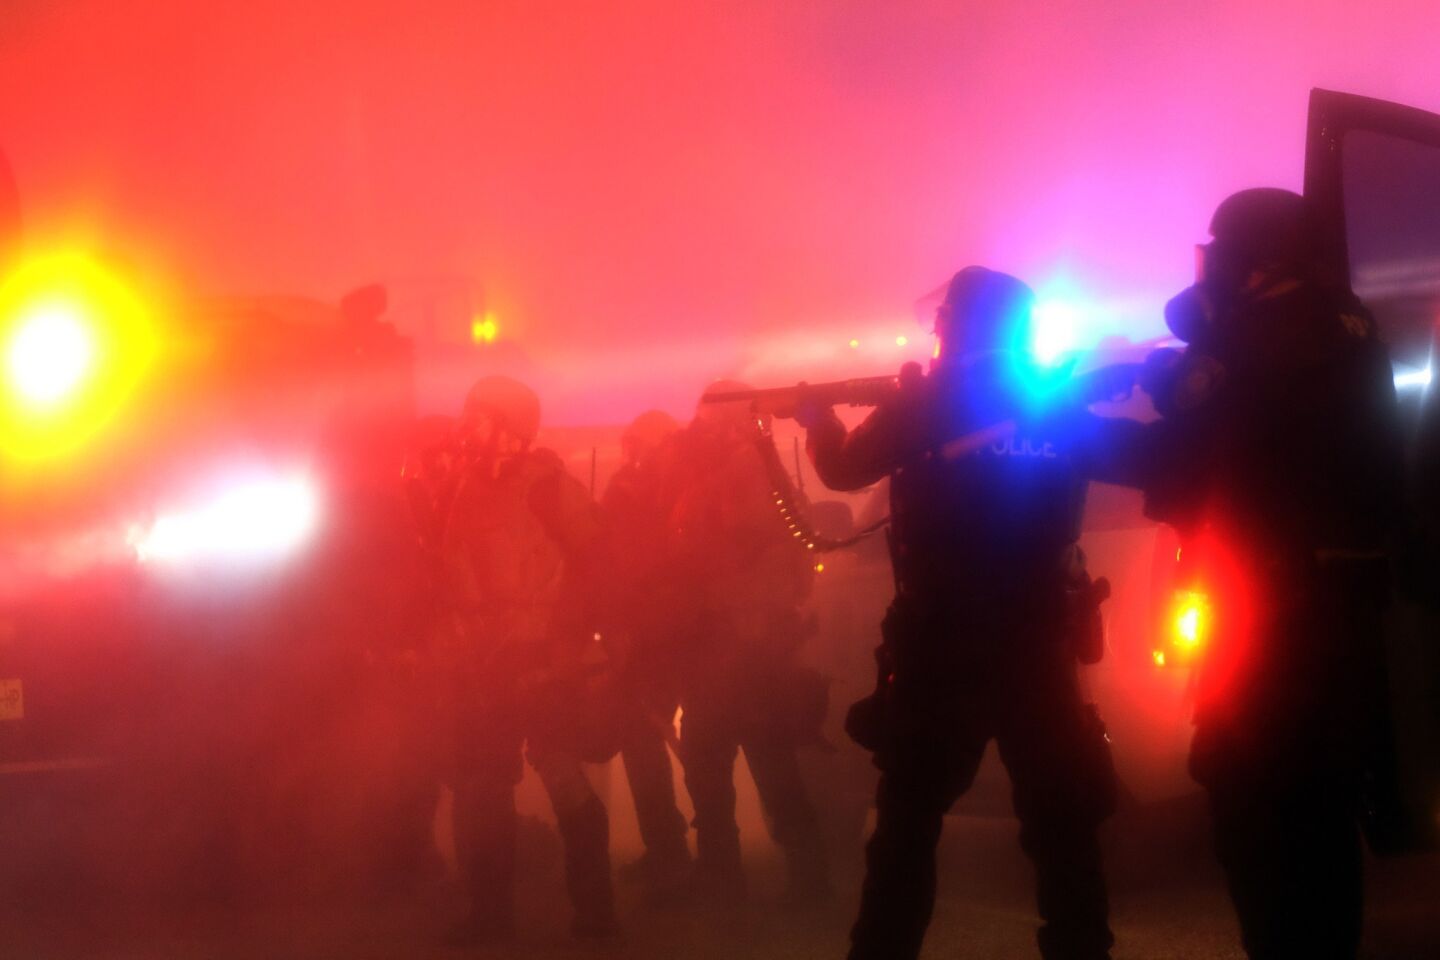 Police are engulfed in tear gas during clashes with protesters after the grand jury decision not to indict the police officer who killed 18-year-old Michael Brown in Ferguson, Mo.